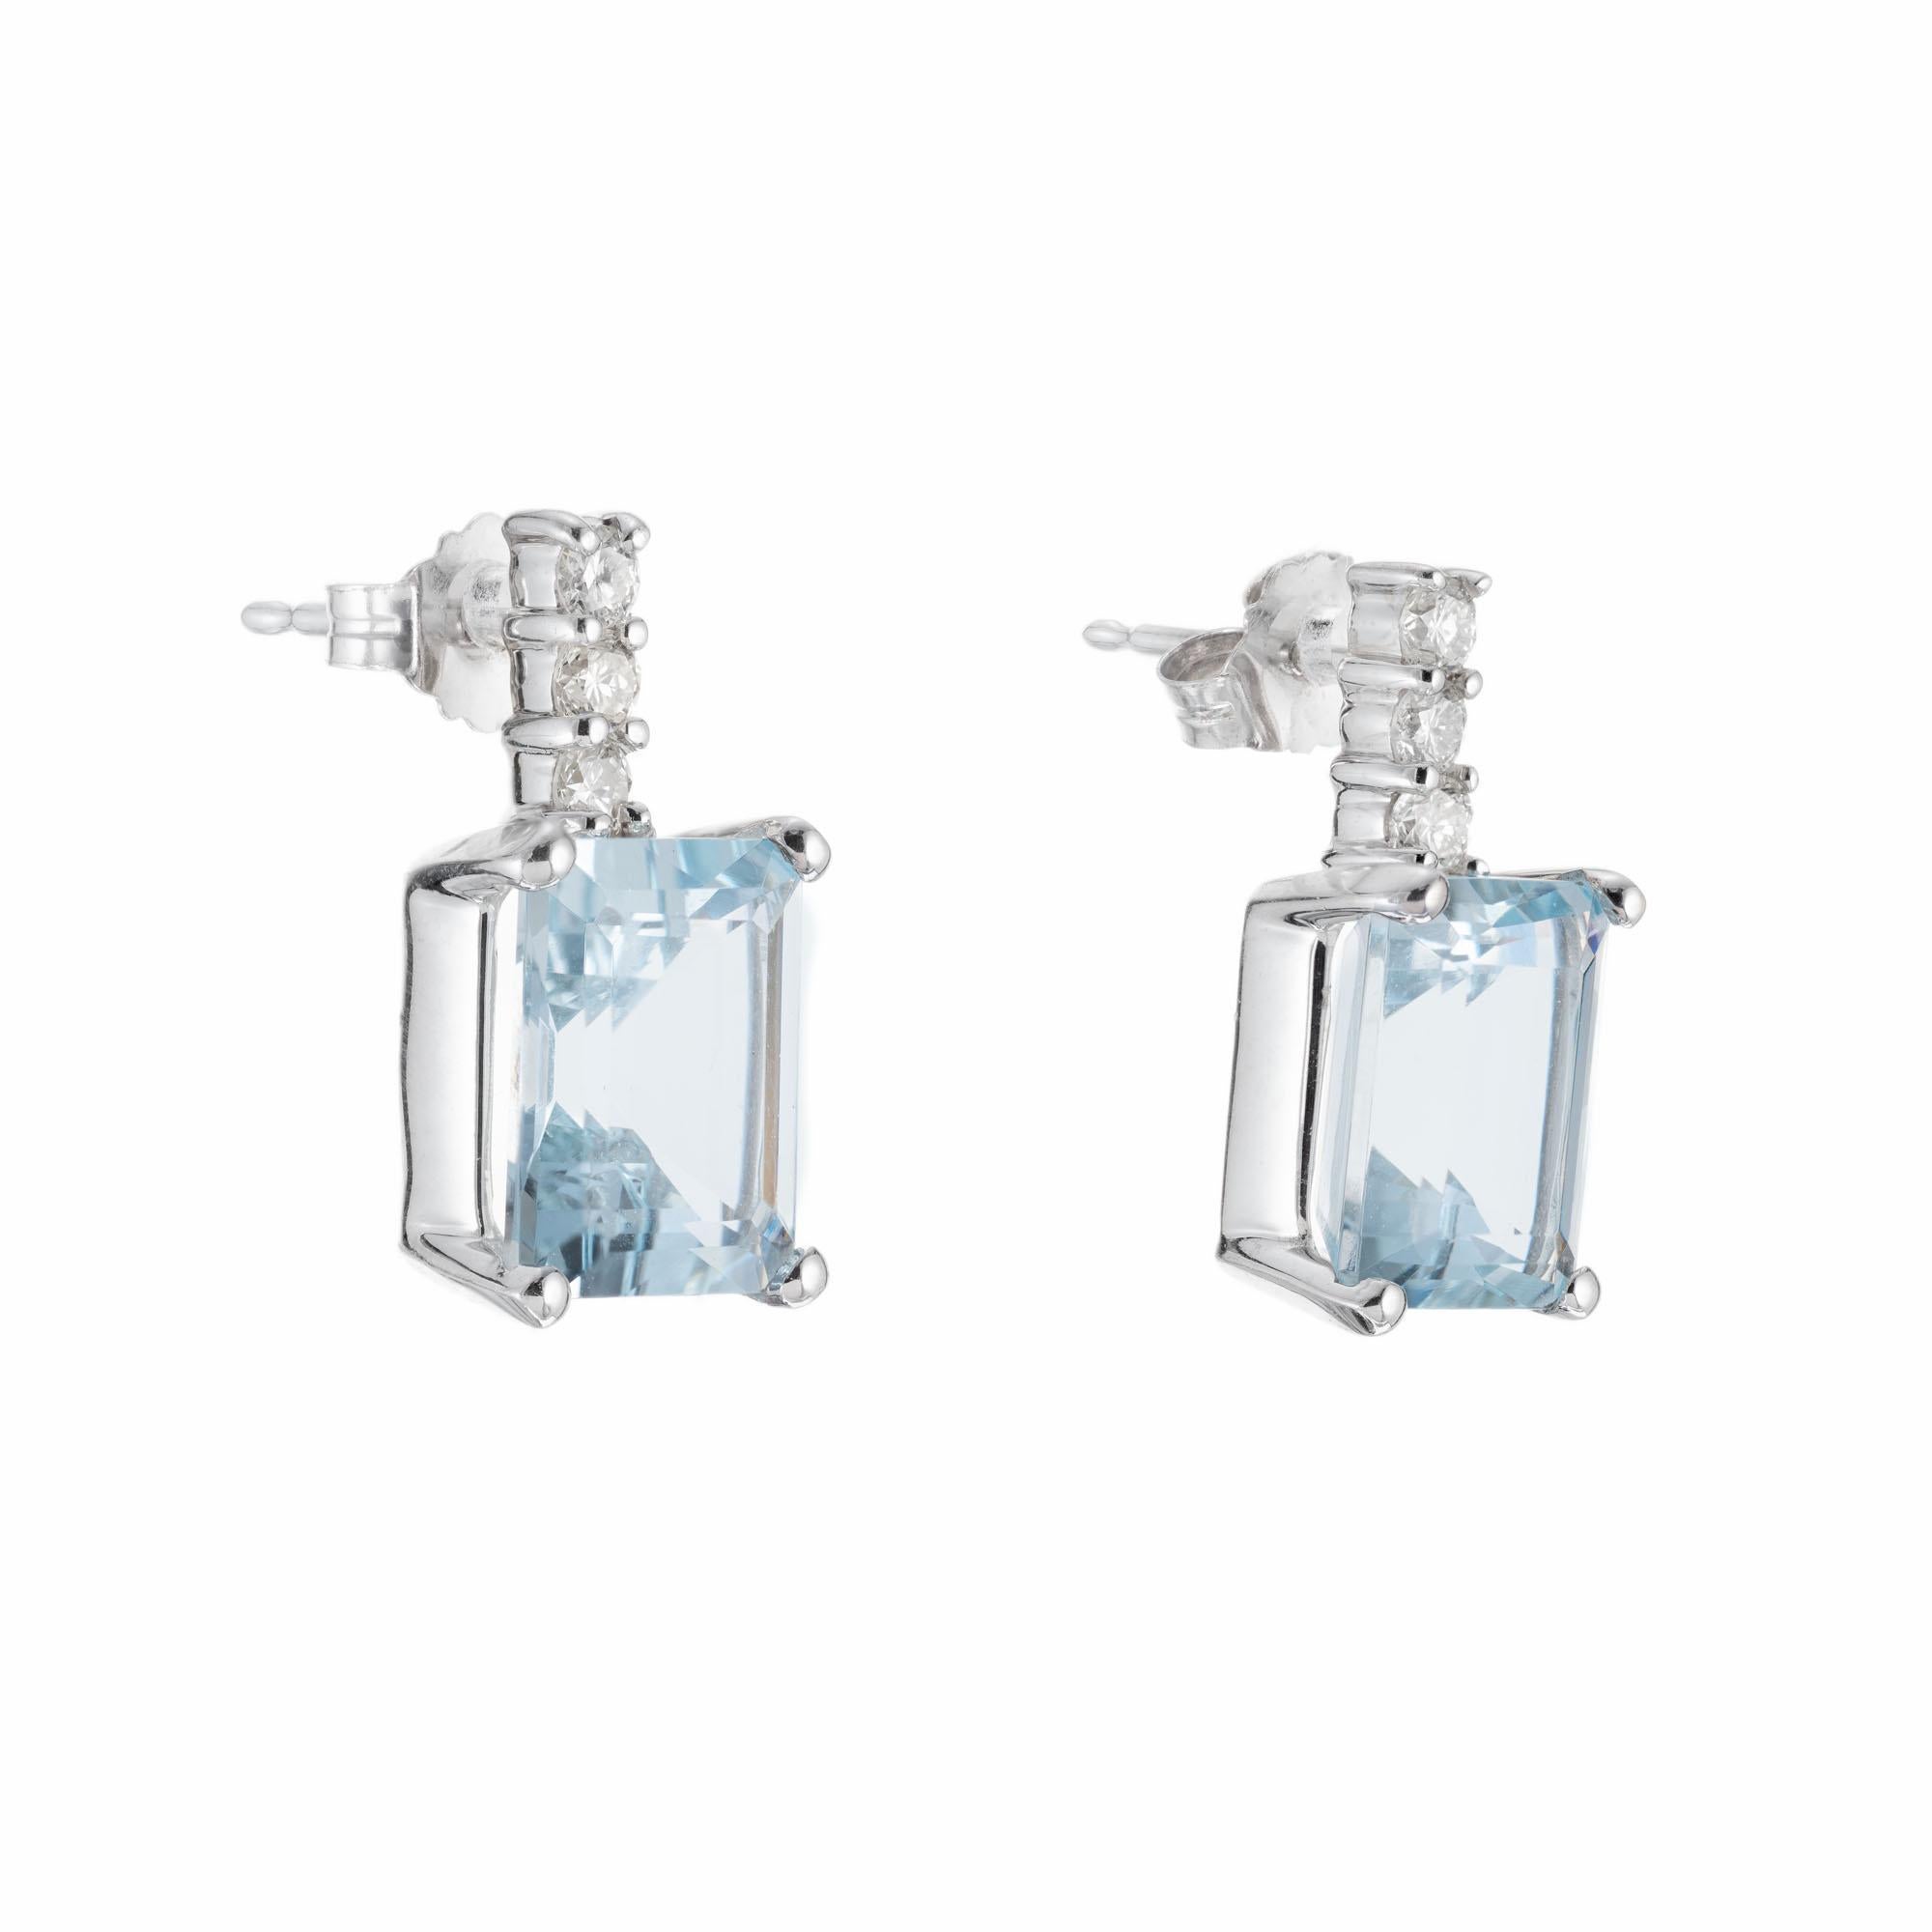 Simple aqua and diamond dangle earrings. Two beautiful greenish blue emerald cut Aquamarine's set in simple four prong settings, each with 3 full cut round accent diamonds in 14k white gold. 

2 10 x 8mm slightly greenish blue Emerald cut Aqua,